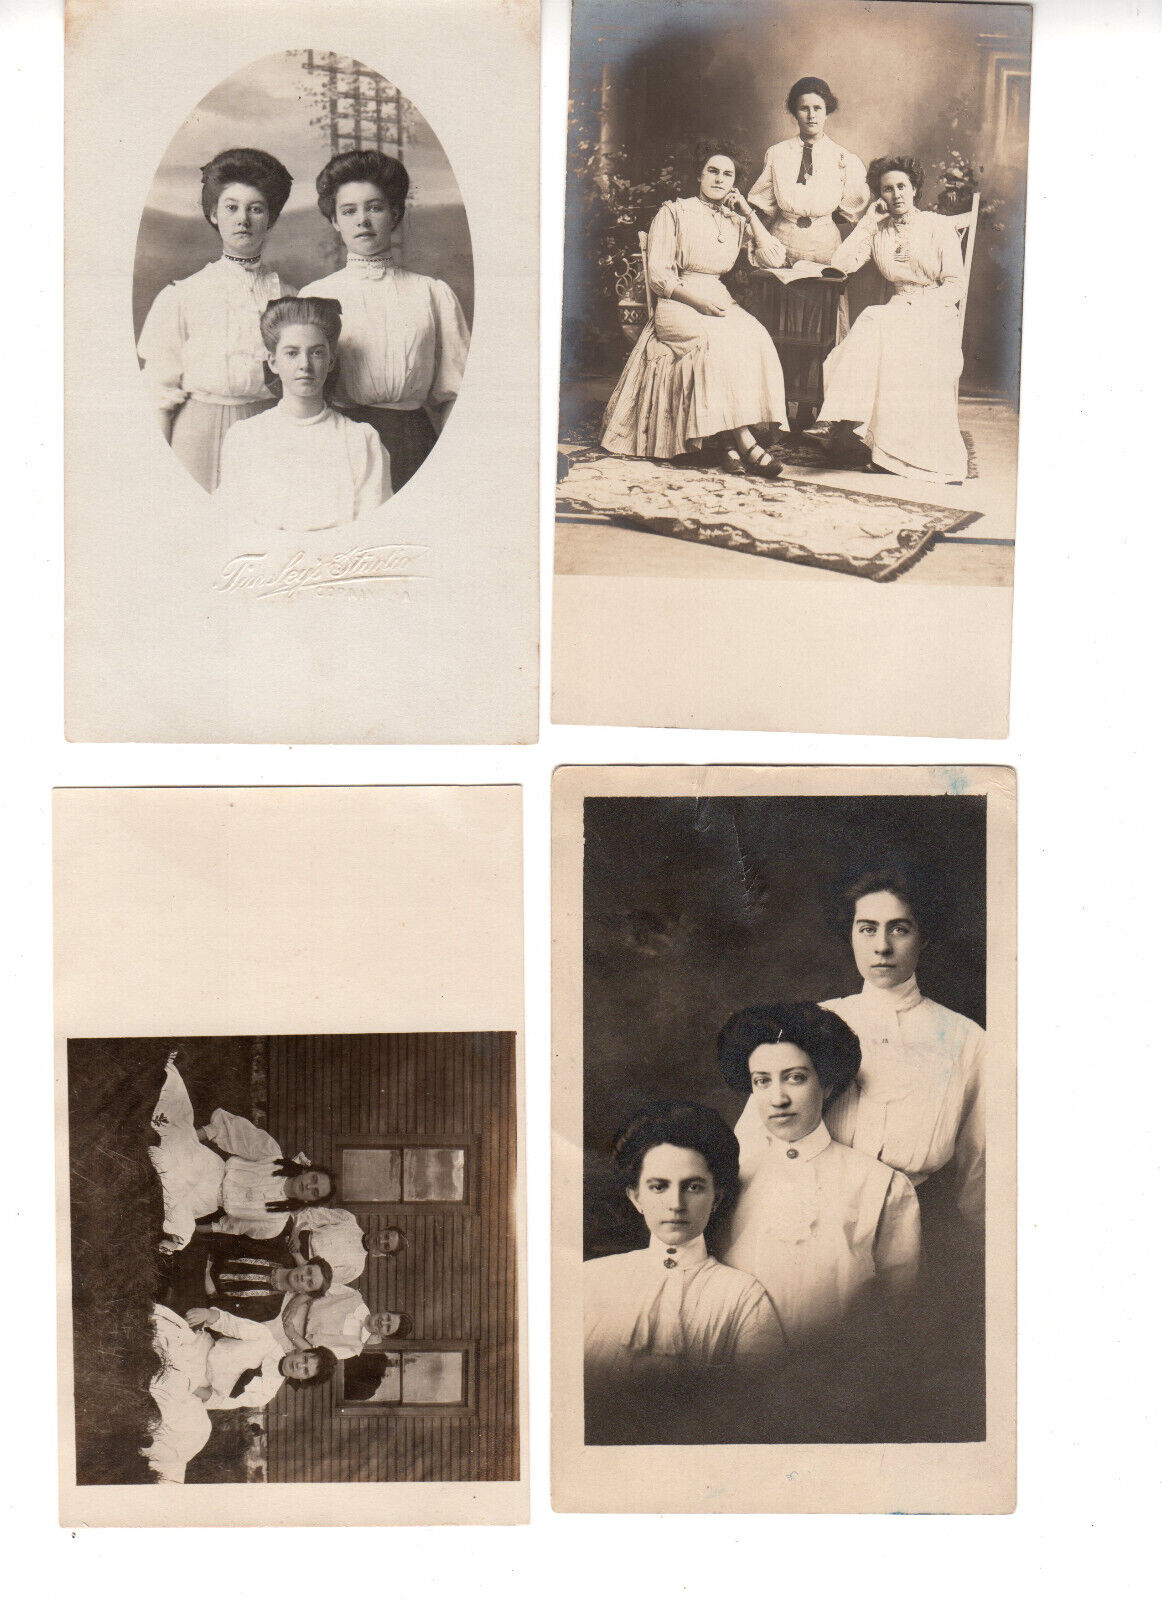 RPPC Postcards (Lot of 4): Anonymous Women - 3 studio and 1 outdoors - location?